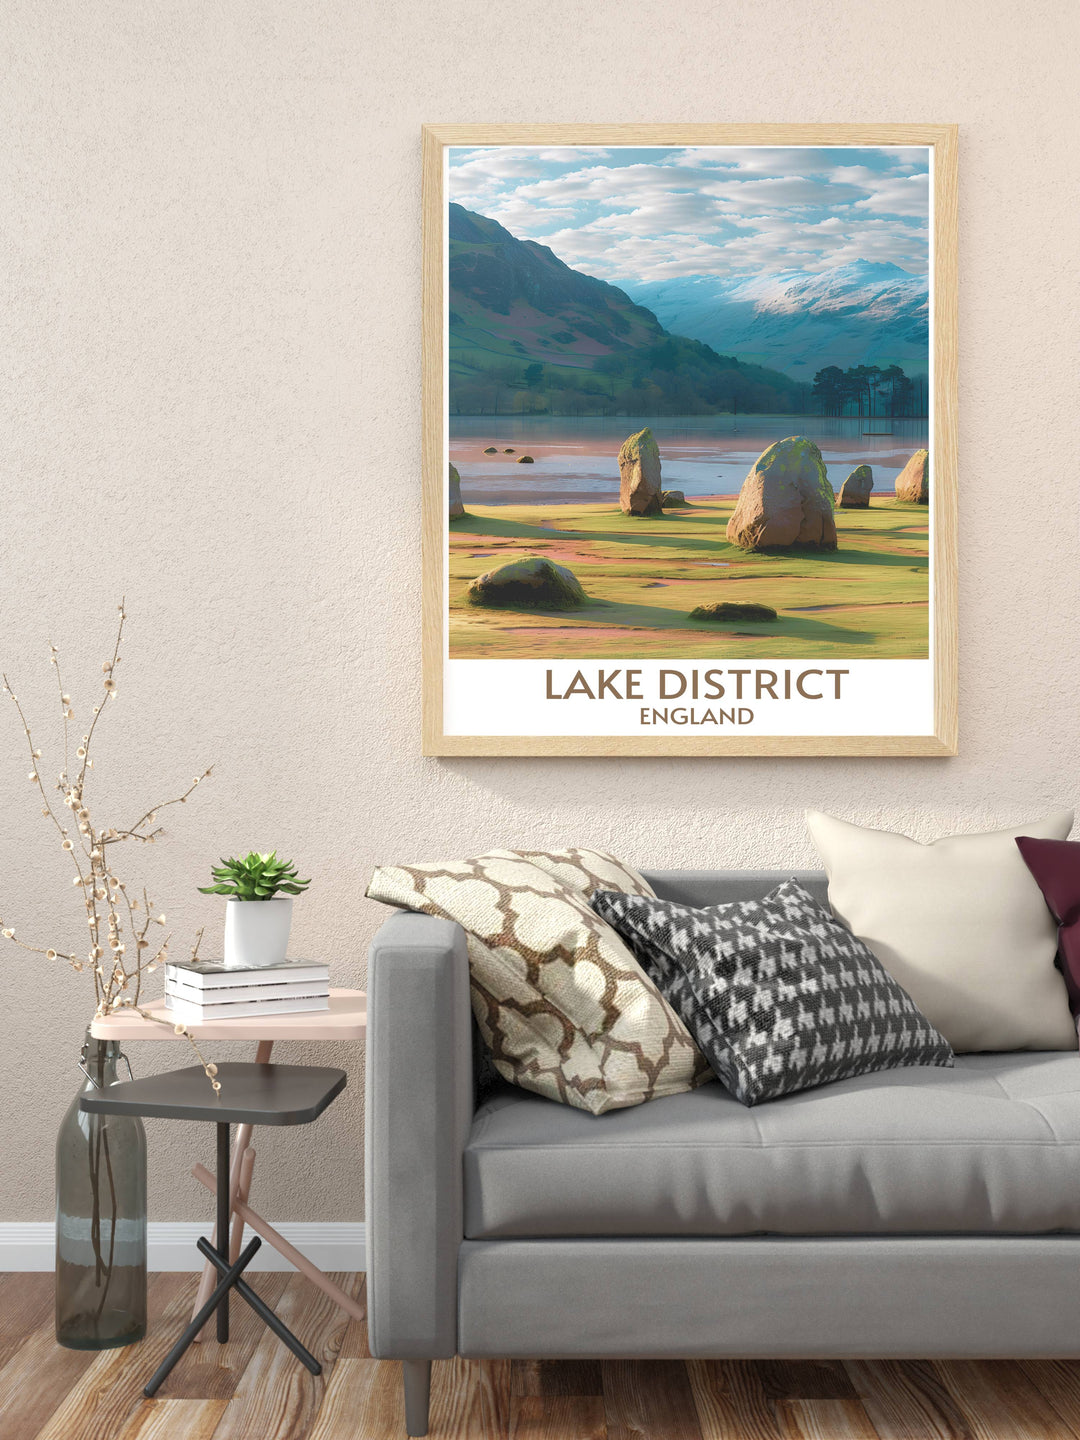 Beautiful wall art of Castlerigg Stone Circle capturing the serene landscapes of the Lake District. This detailed poster is a wonderful addition to any home decor, showcasing the unique historical beauty of North West Englands ancient site.